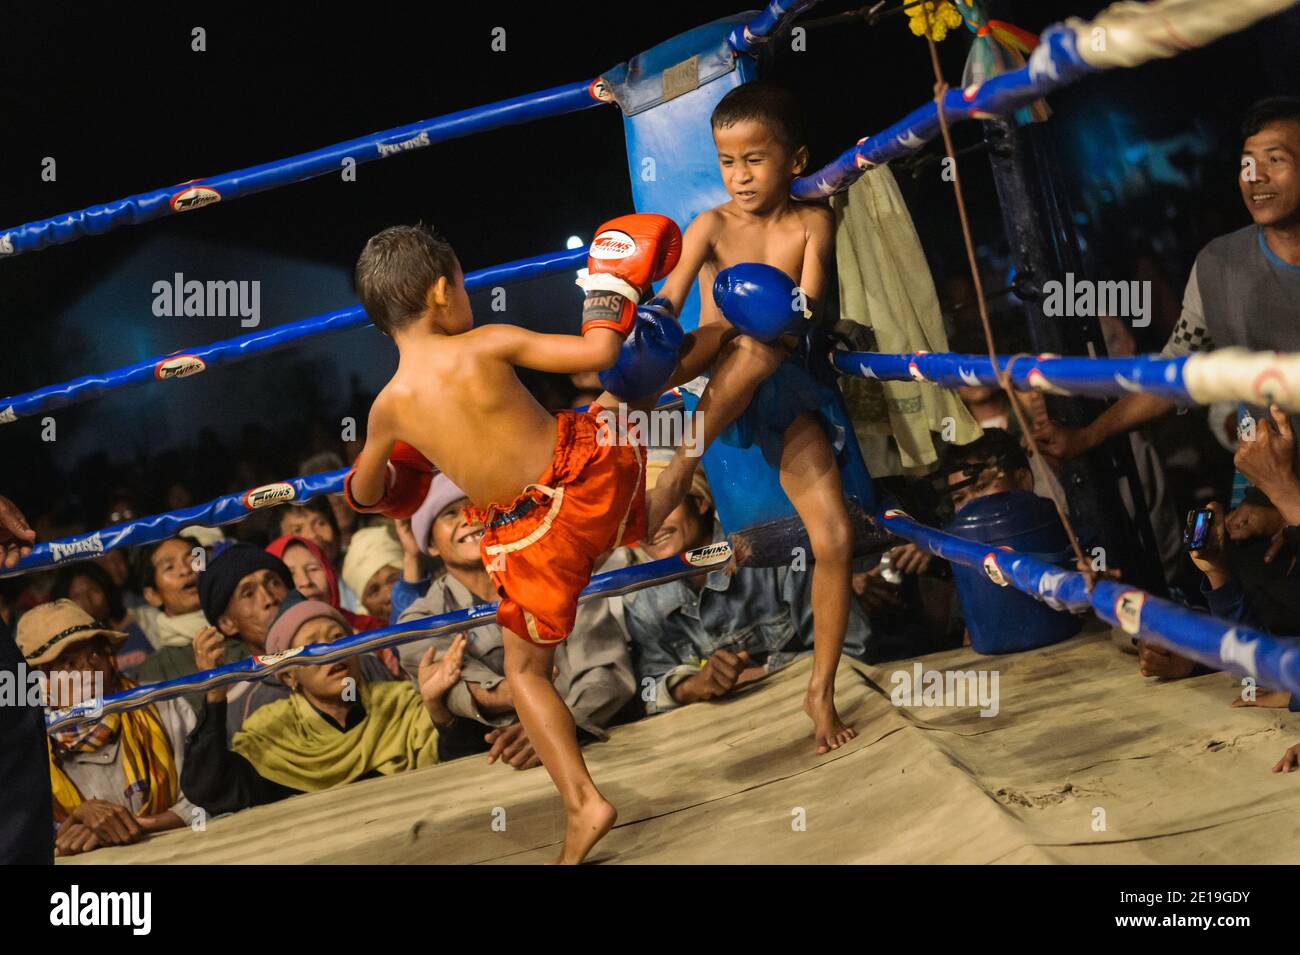 Children Thai boxing fight. Muay Thai (Thai boxing) is the national sport of Thailand. Stock Photo